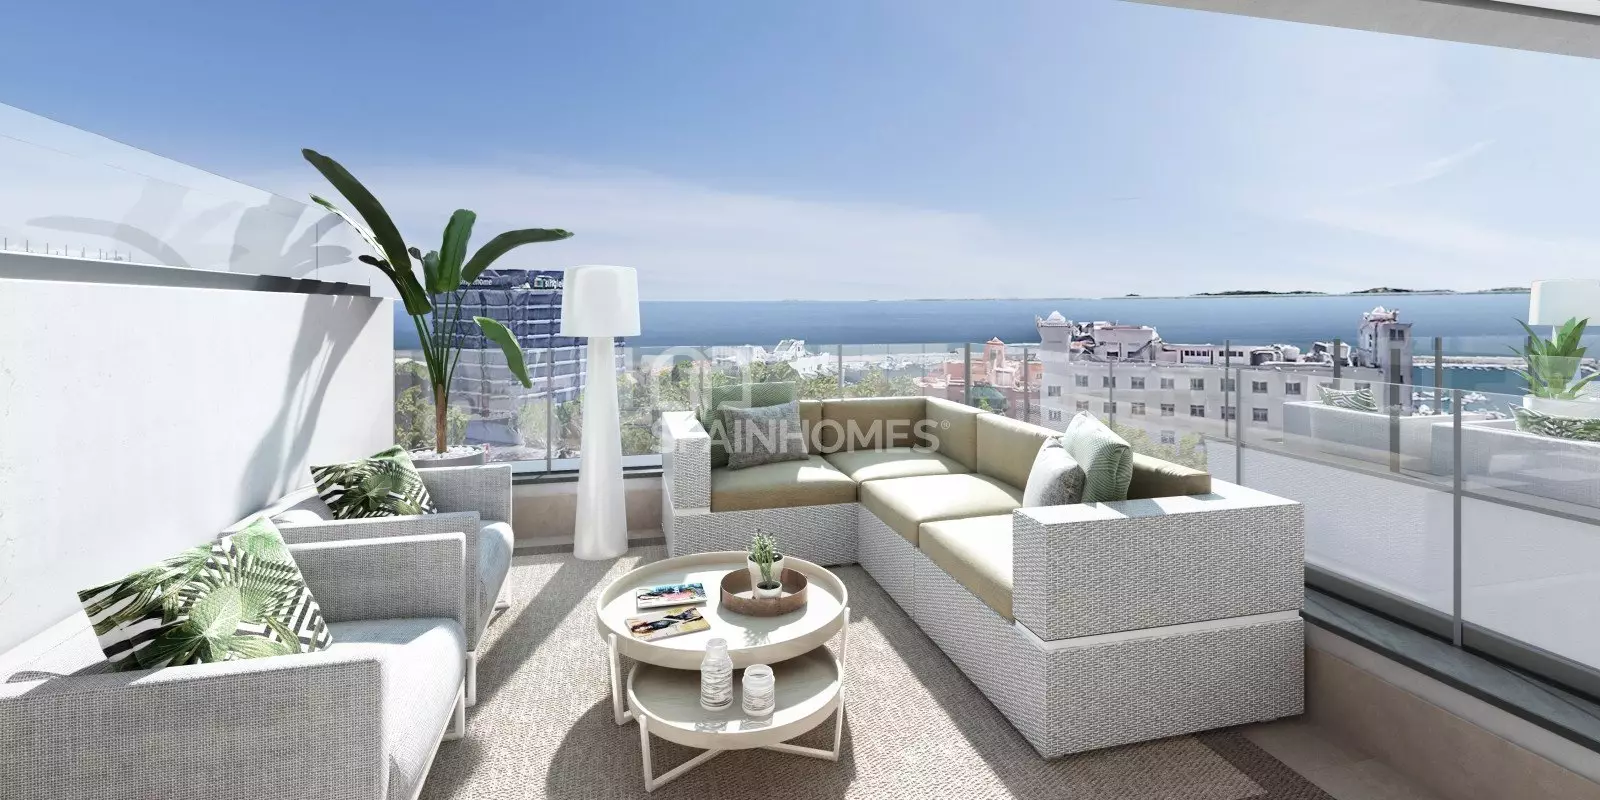 Centrally Located Eco-friendly Apartments in Marbella